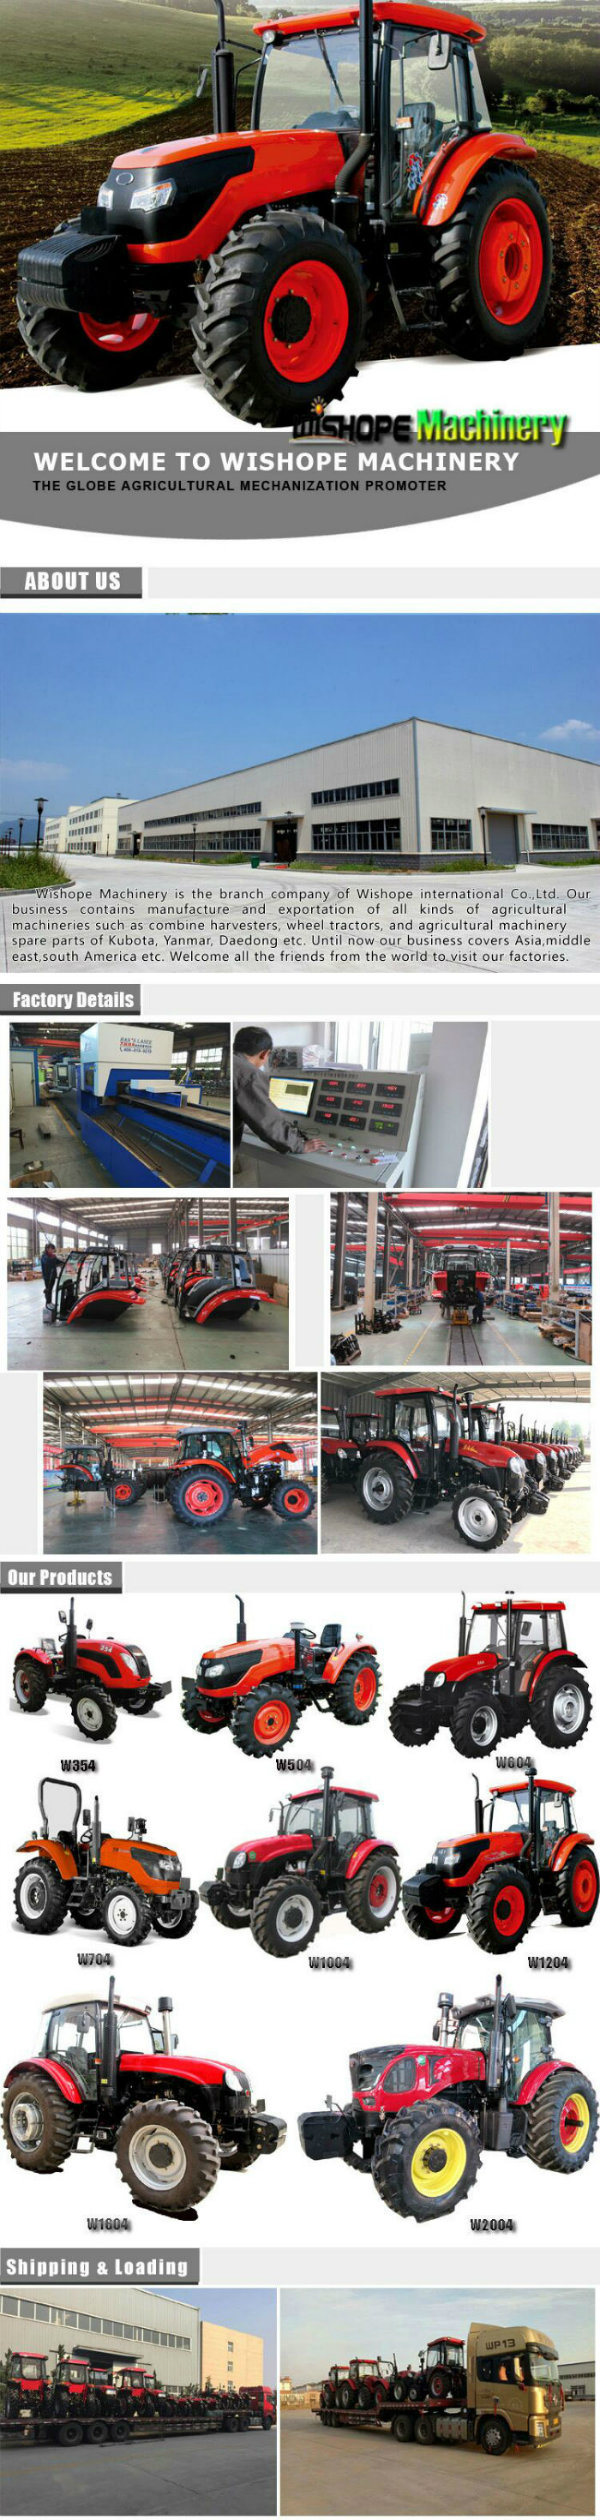 Chinese Farm Rotary Tiller Cultivator for Sale